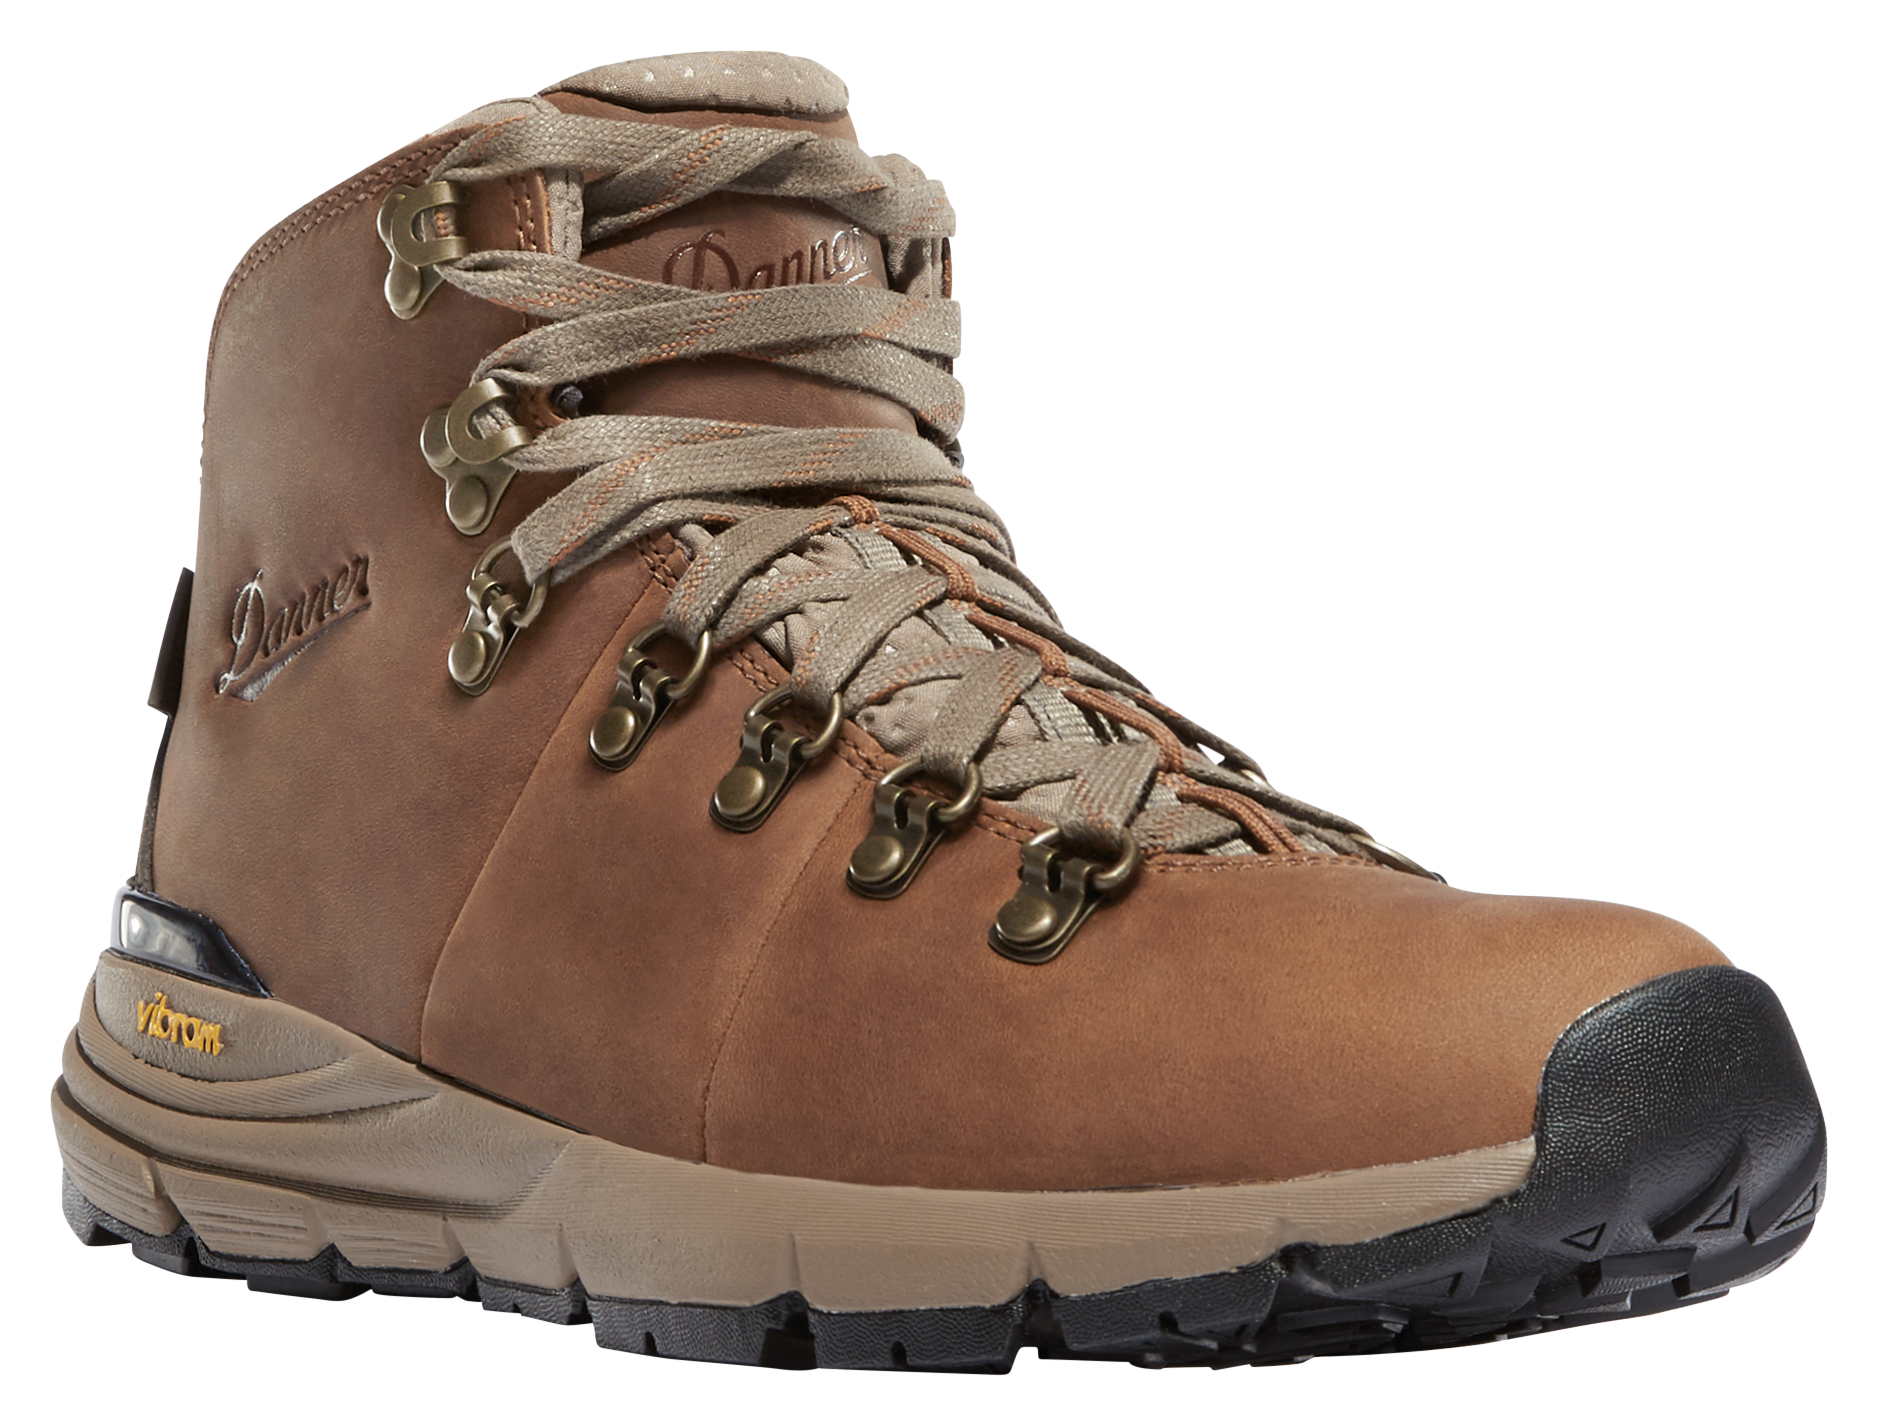 Danner Mountain 600 Leather Waterproof Hiking Boots for Ladies - Rich Brown - 6M